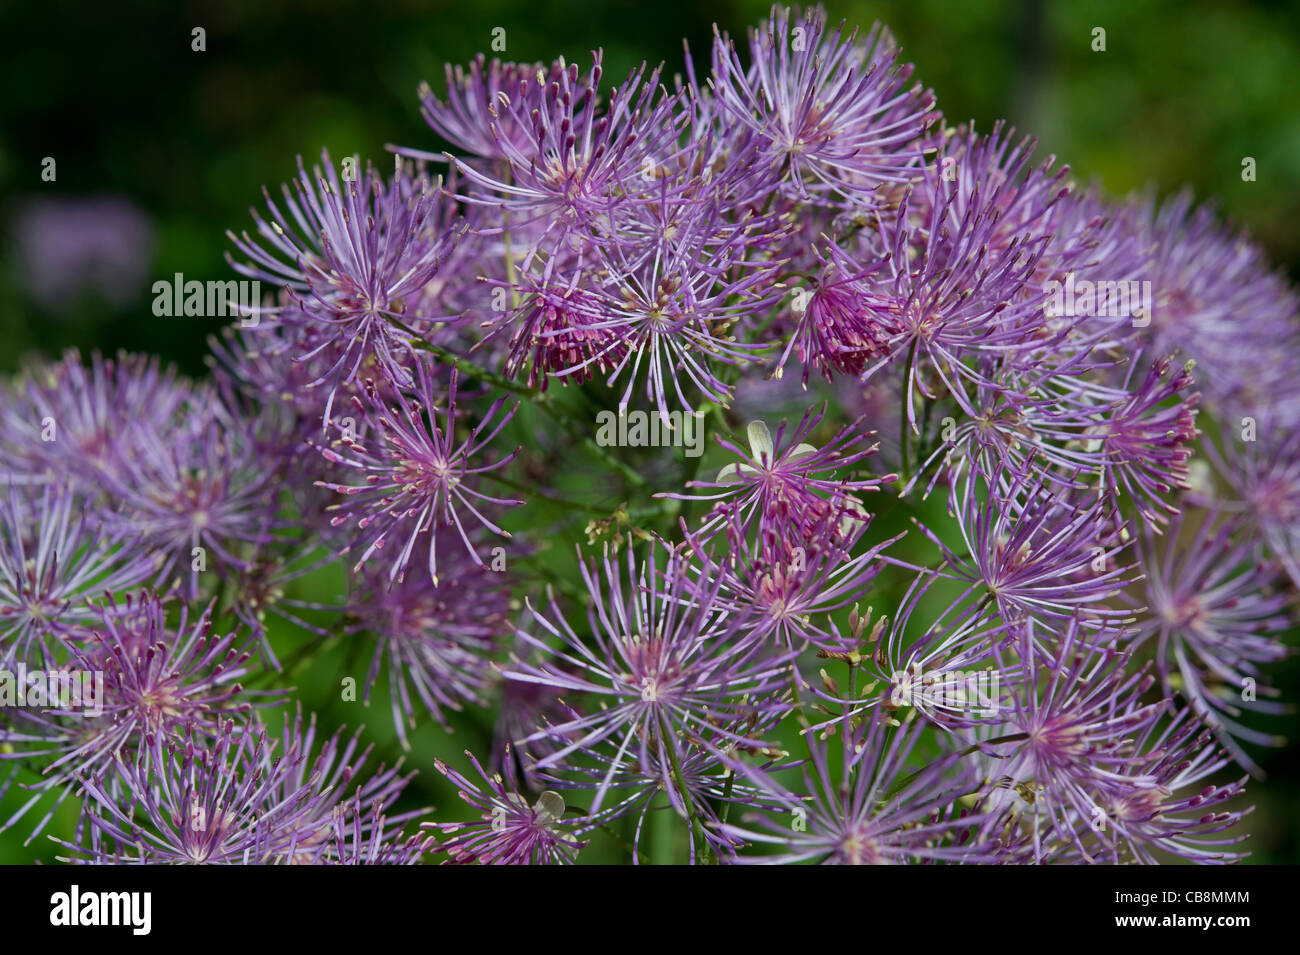 Tall meadow-rue (thalictrum pubescens) flowers Stock Photo